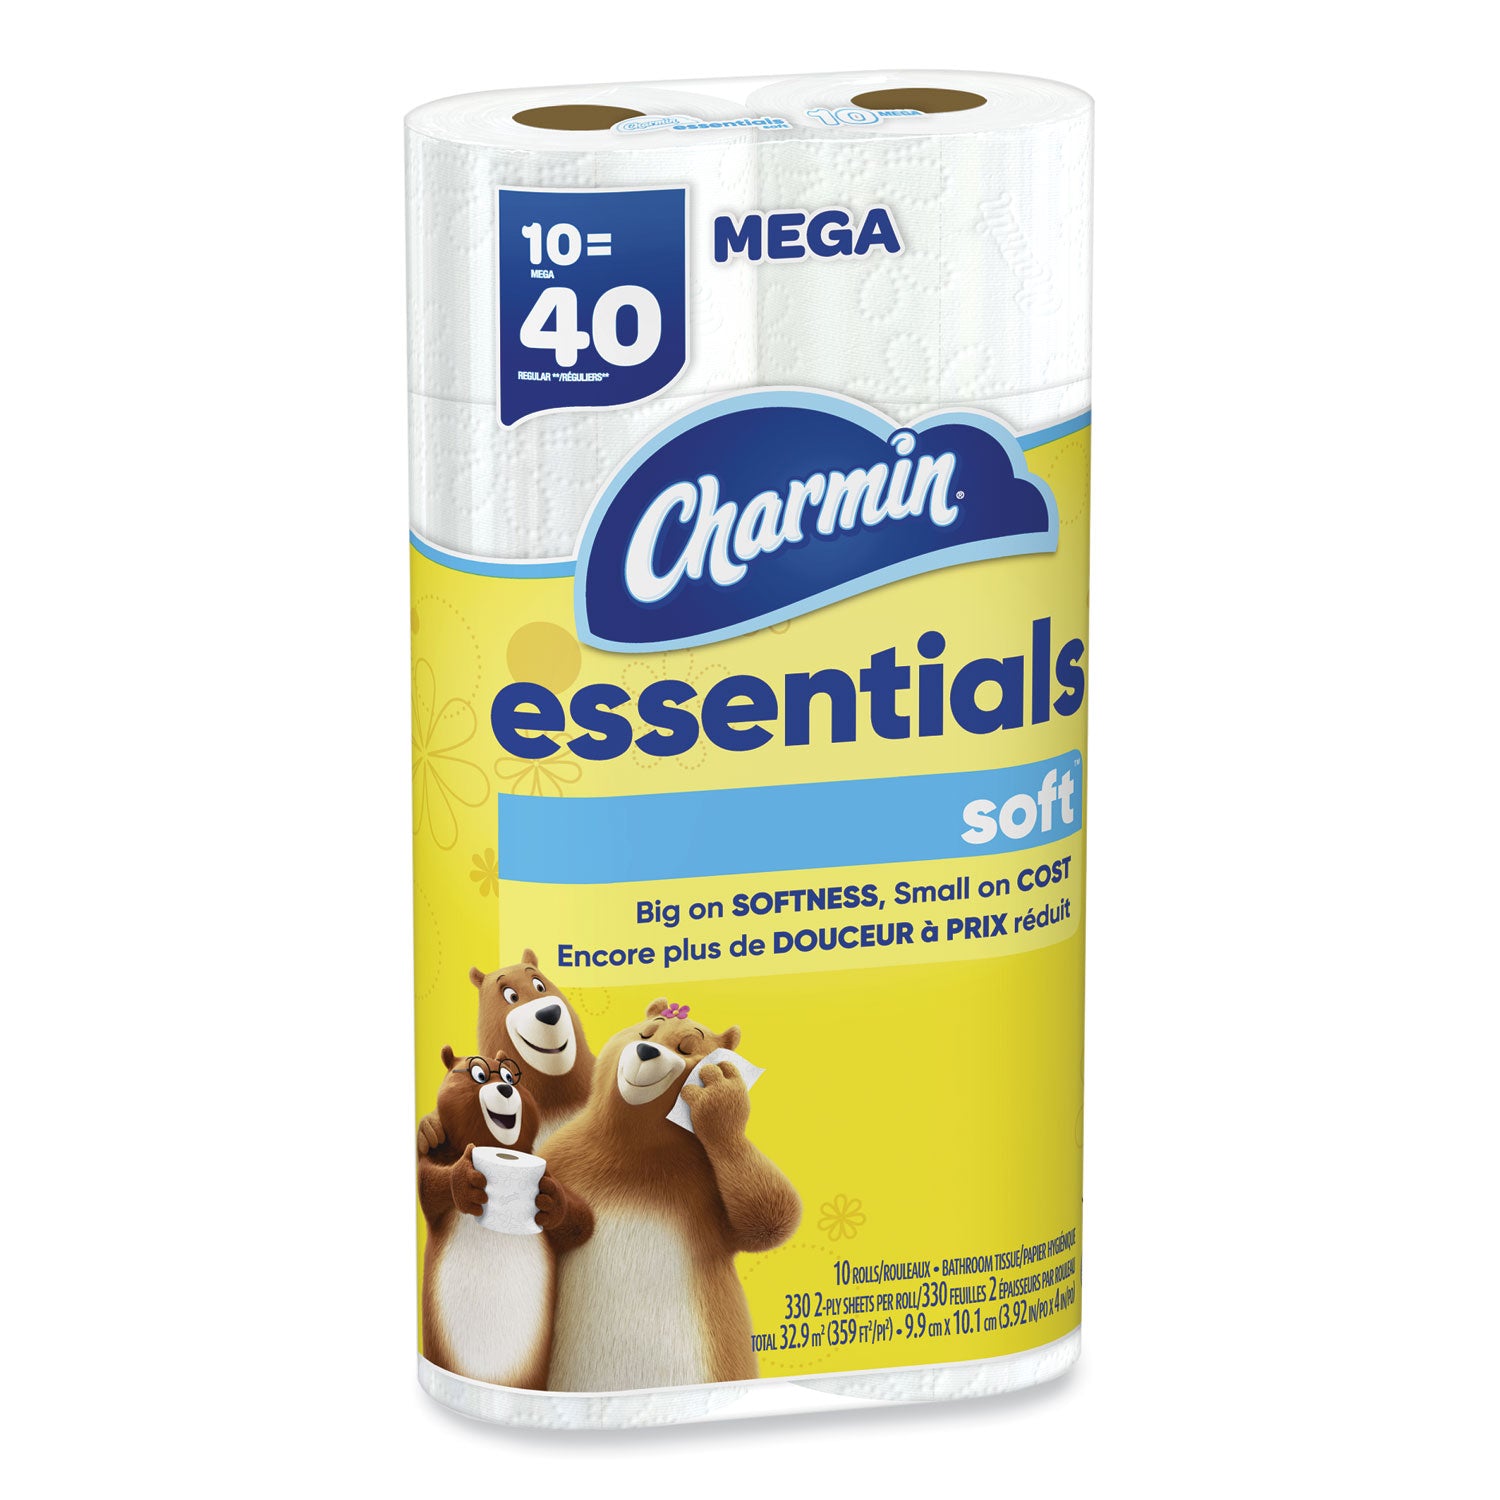 essentials-soft-bathroom-tissue-septic-safe-2-ply-white-330-sheets-roll-30-rolls-carton_pgc04534 - 3